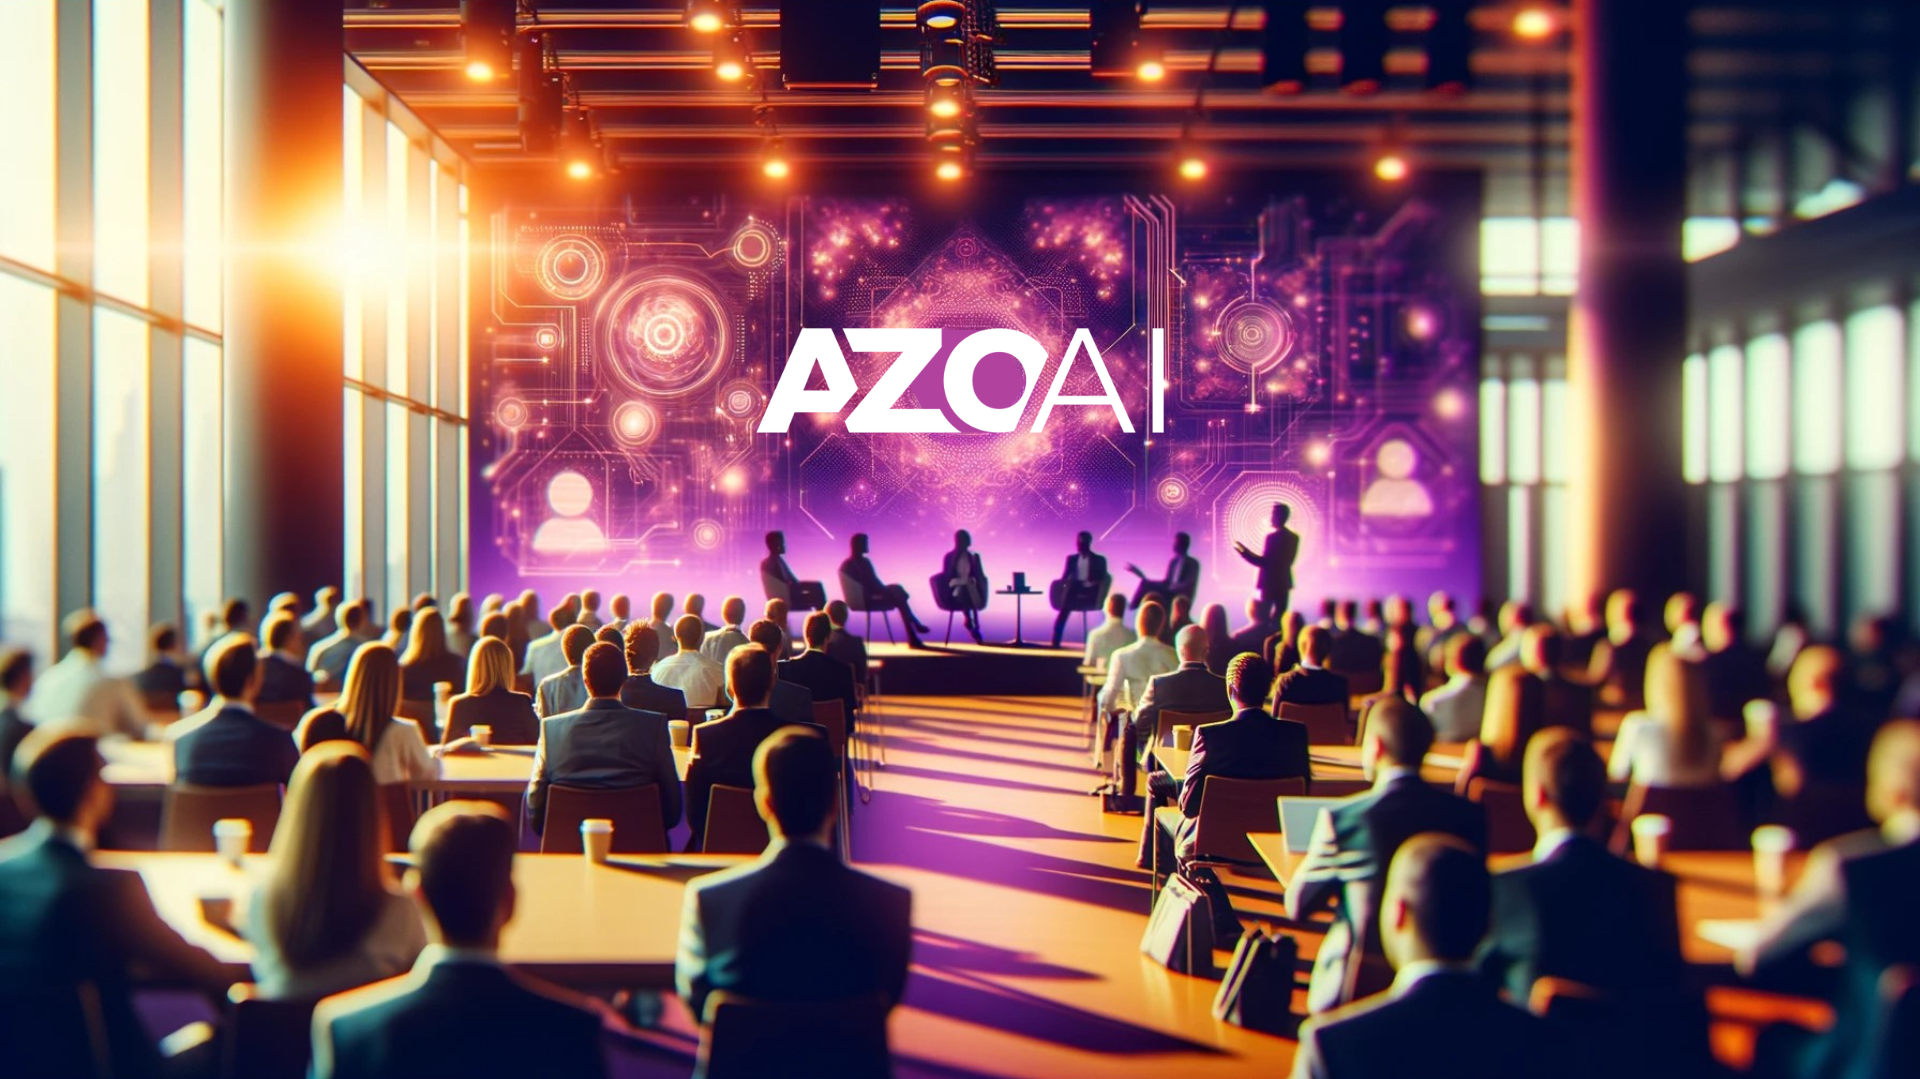 AZoNetwork Launches AZoAI, an Open-Access Platform for the Artificial Intelligence Industry